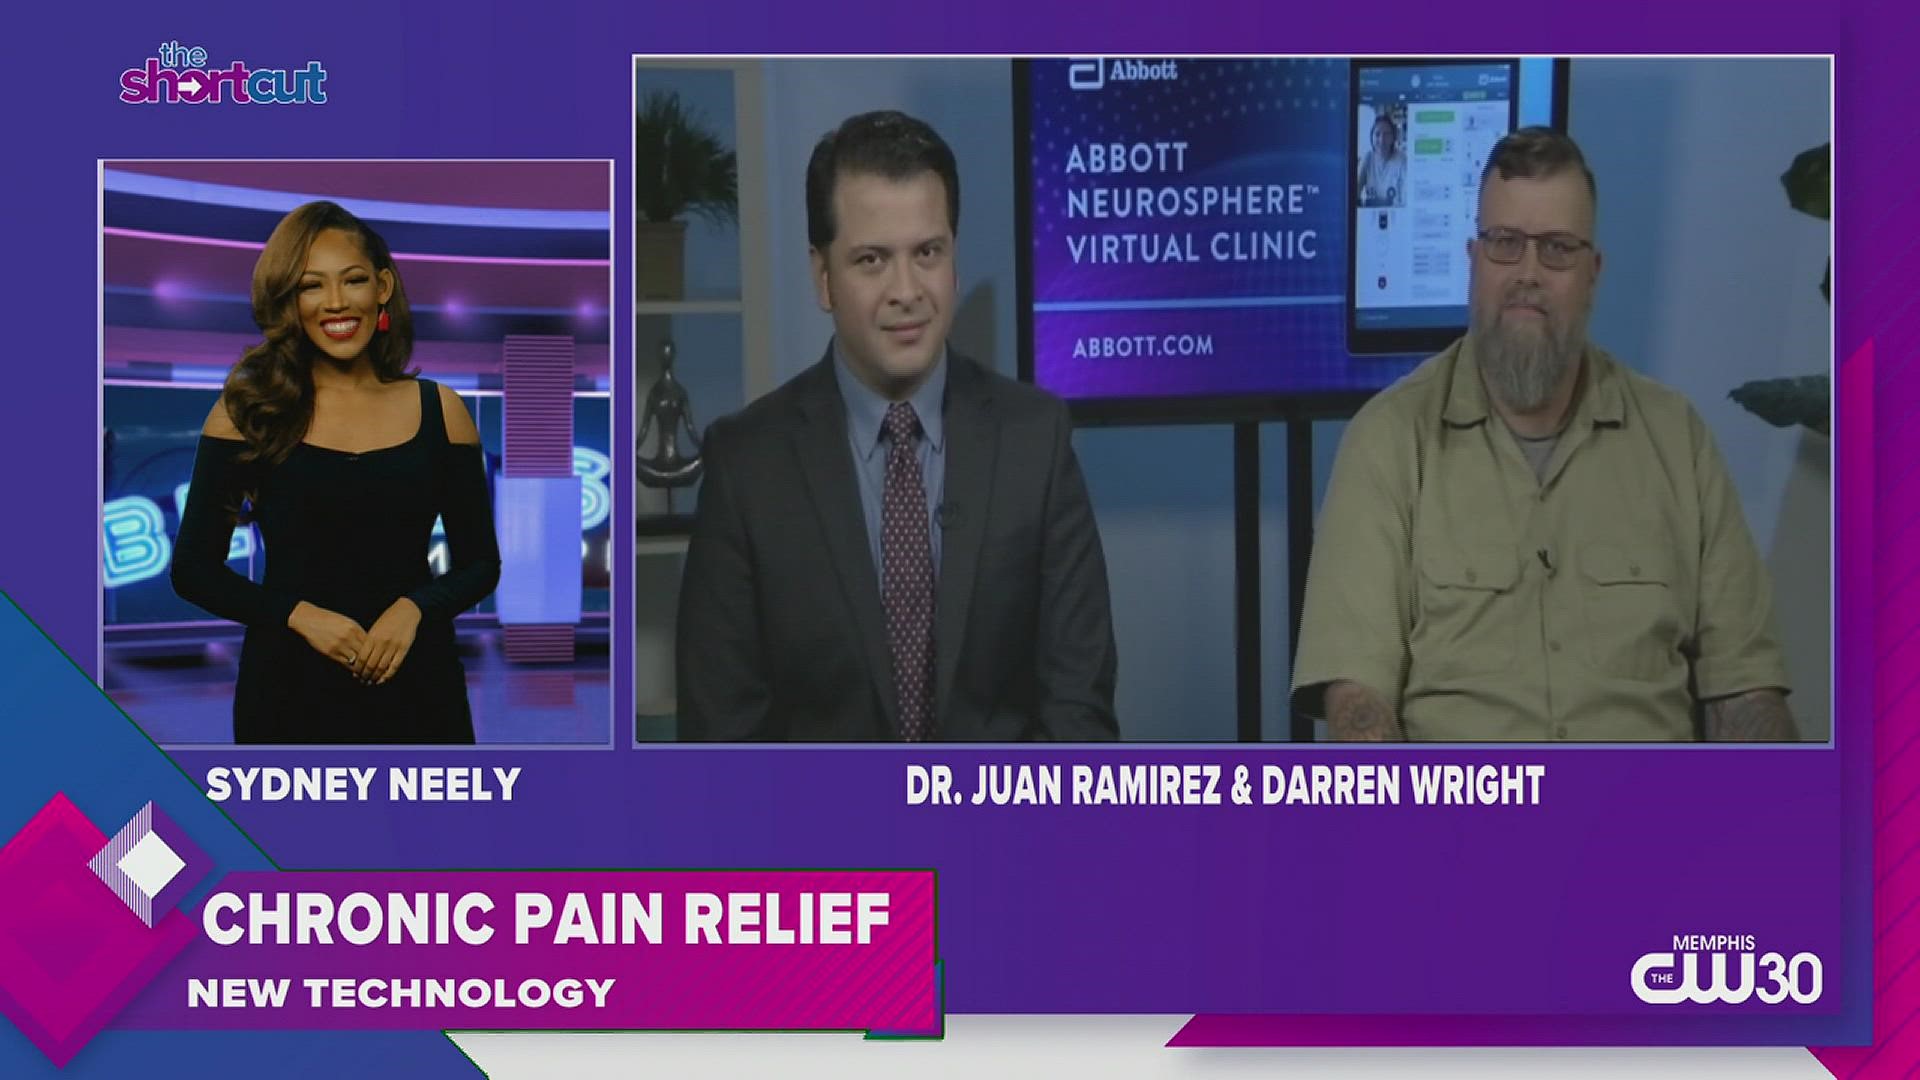 Don't let chronic pain ruin your life! Relieve it with this new state-of-the-art technology! Courtesy of Dr. Juan Ramirez and Parkinson's patient Darryn Wright.